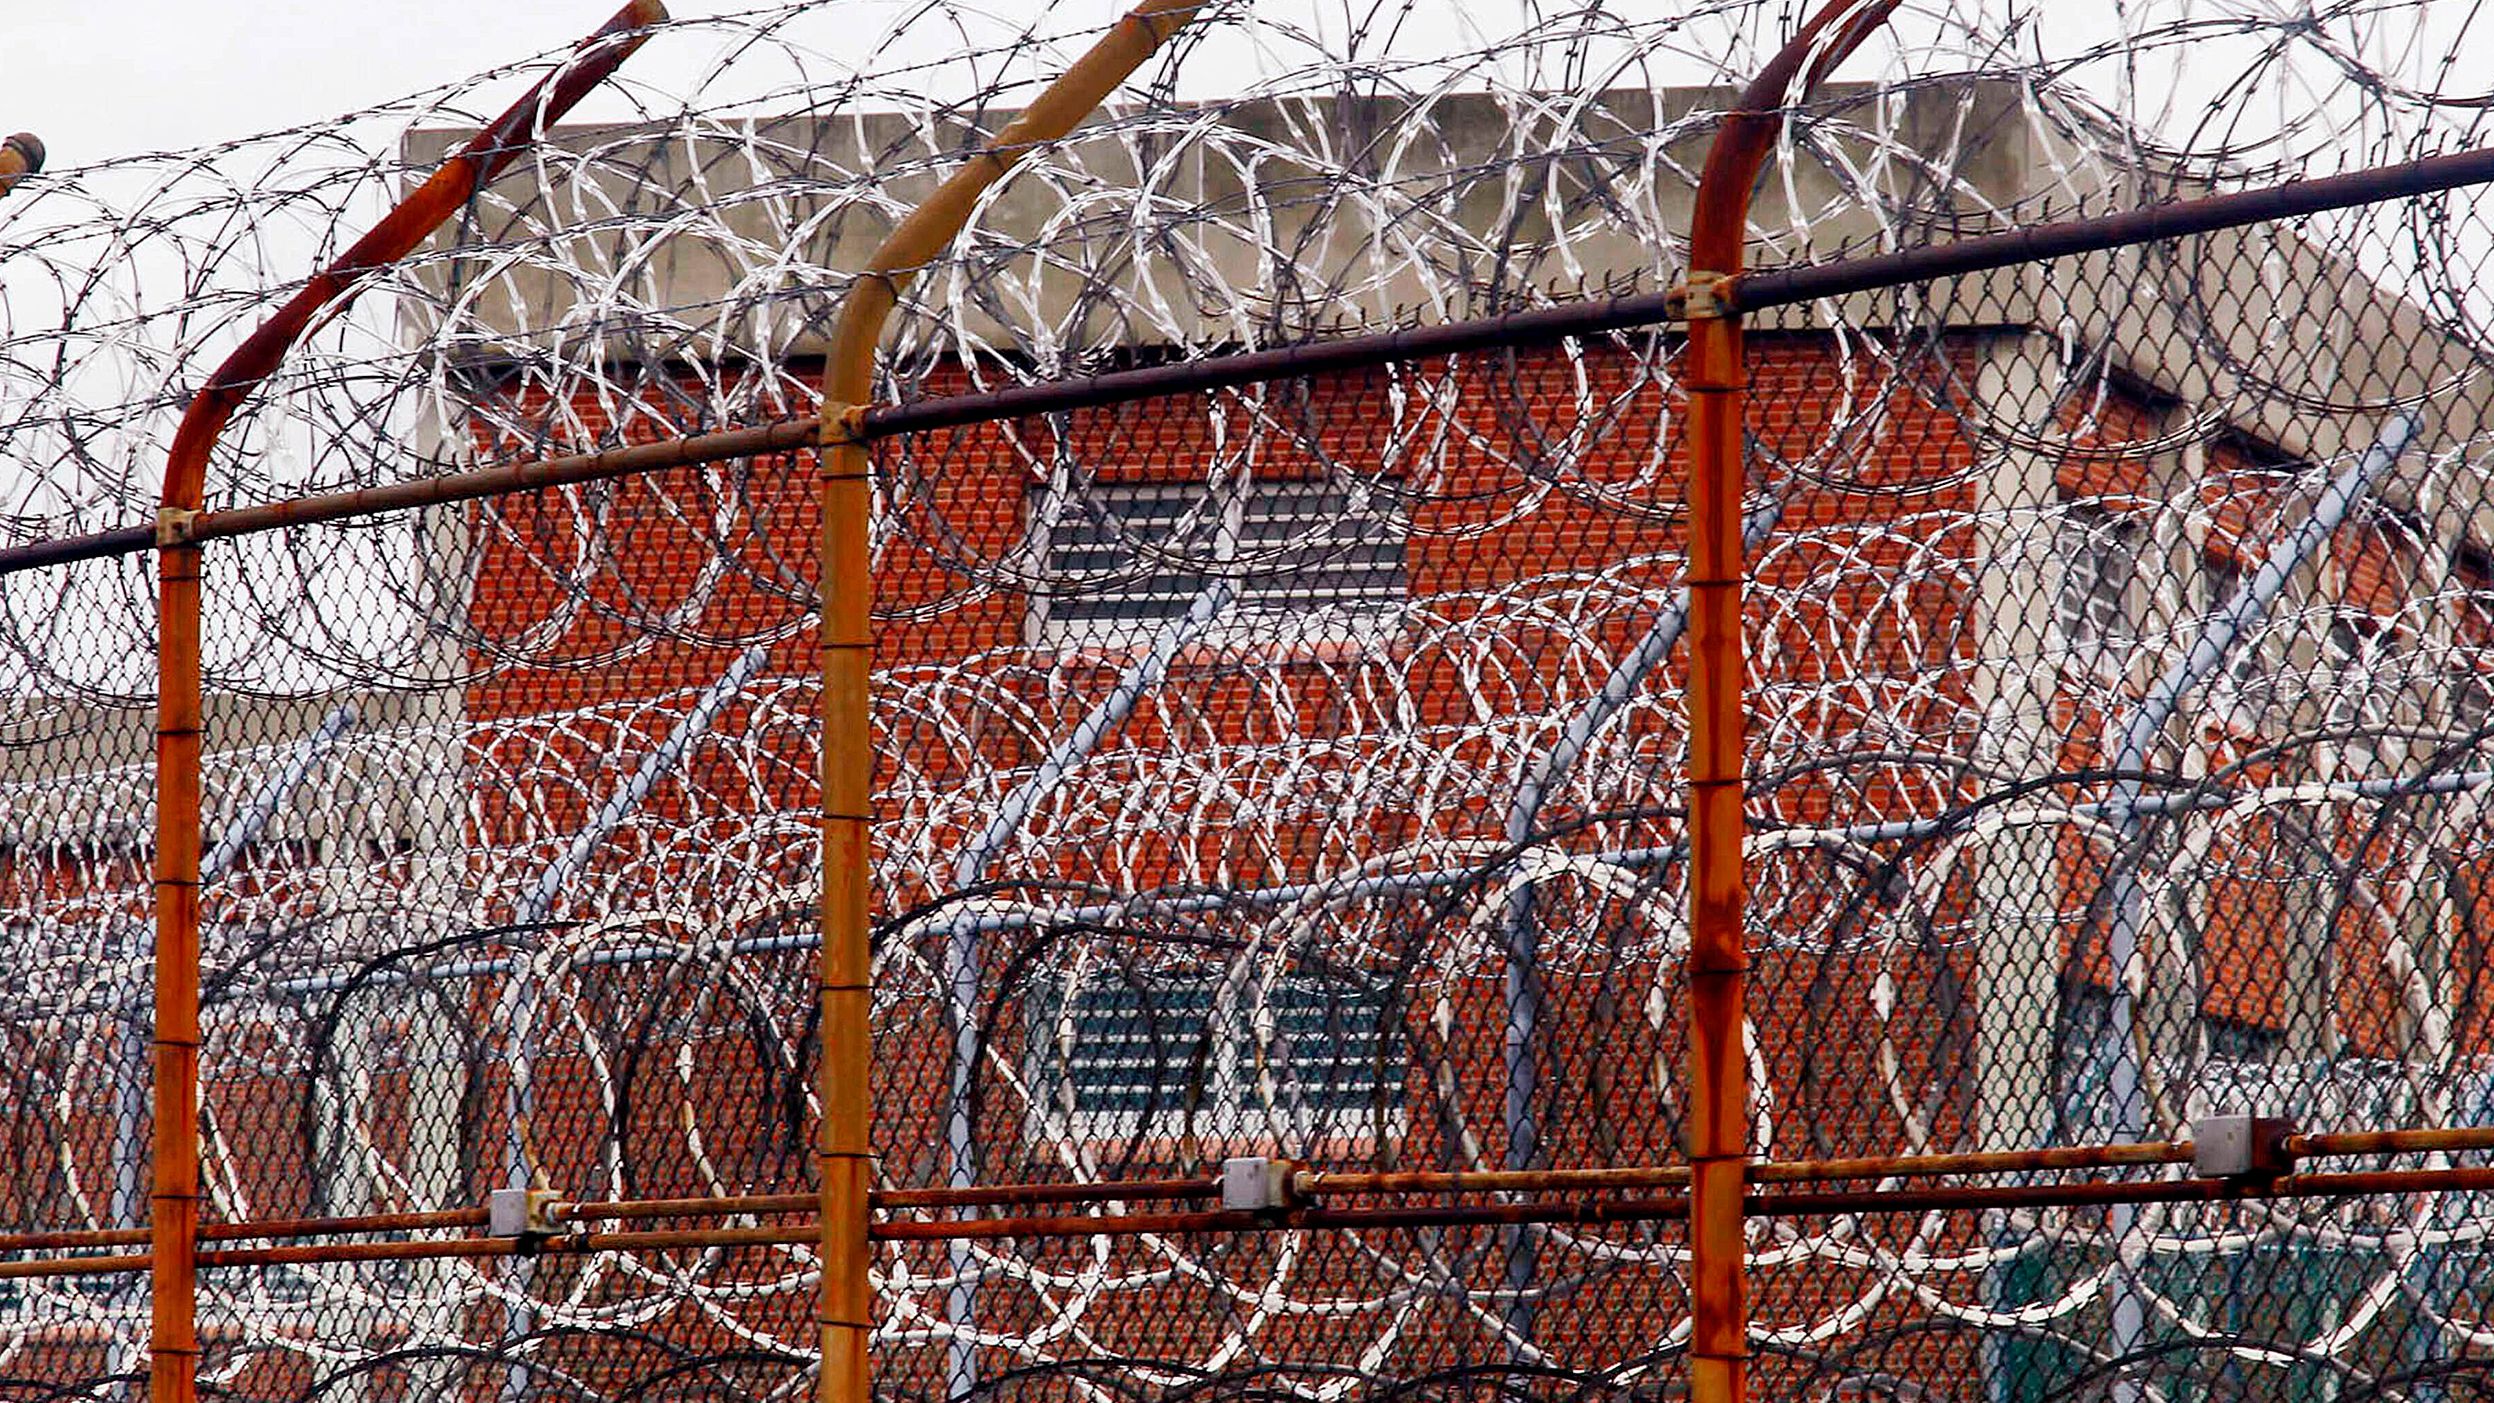 A security fence surrounds inmate housing on the Rikers Island correctional facility in New York in this 2011 photo.